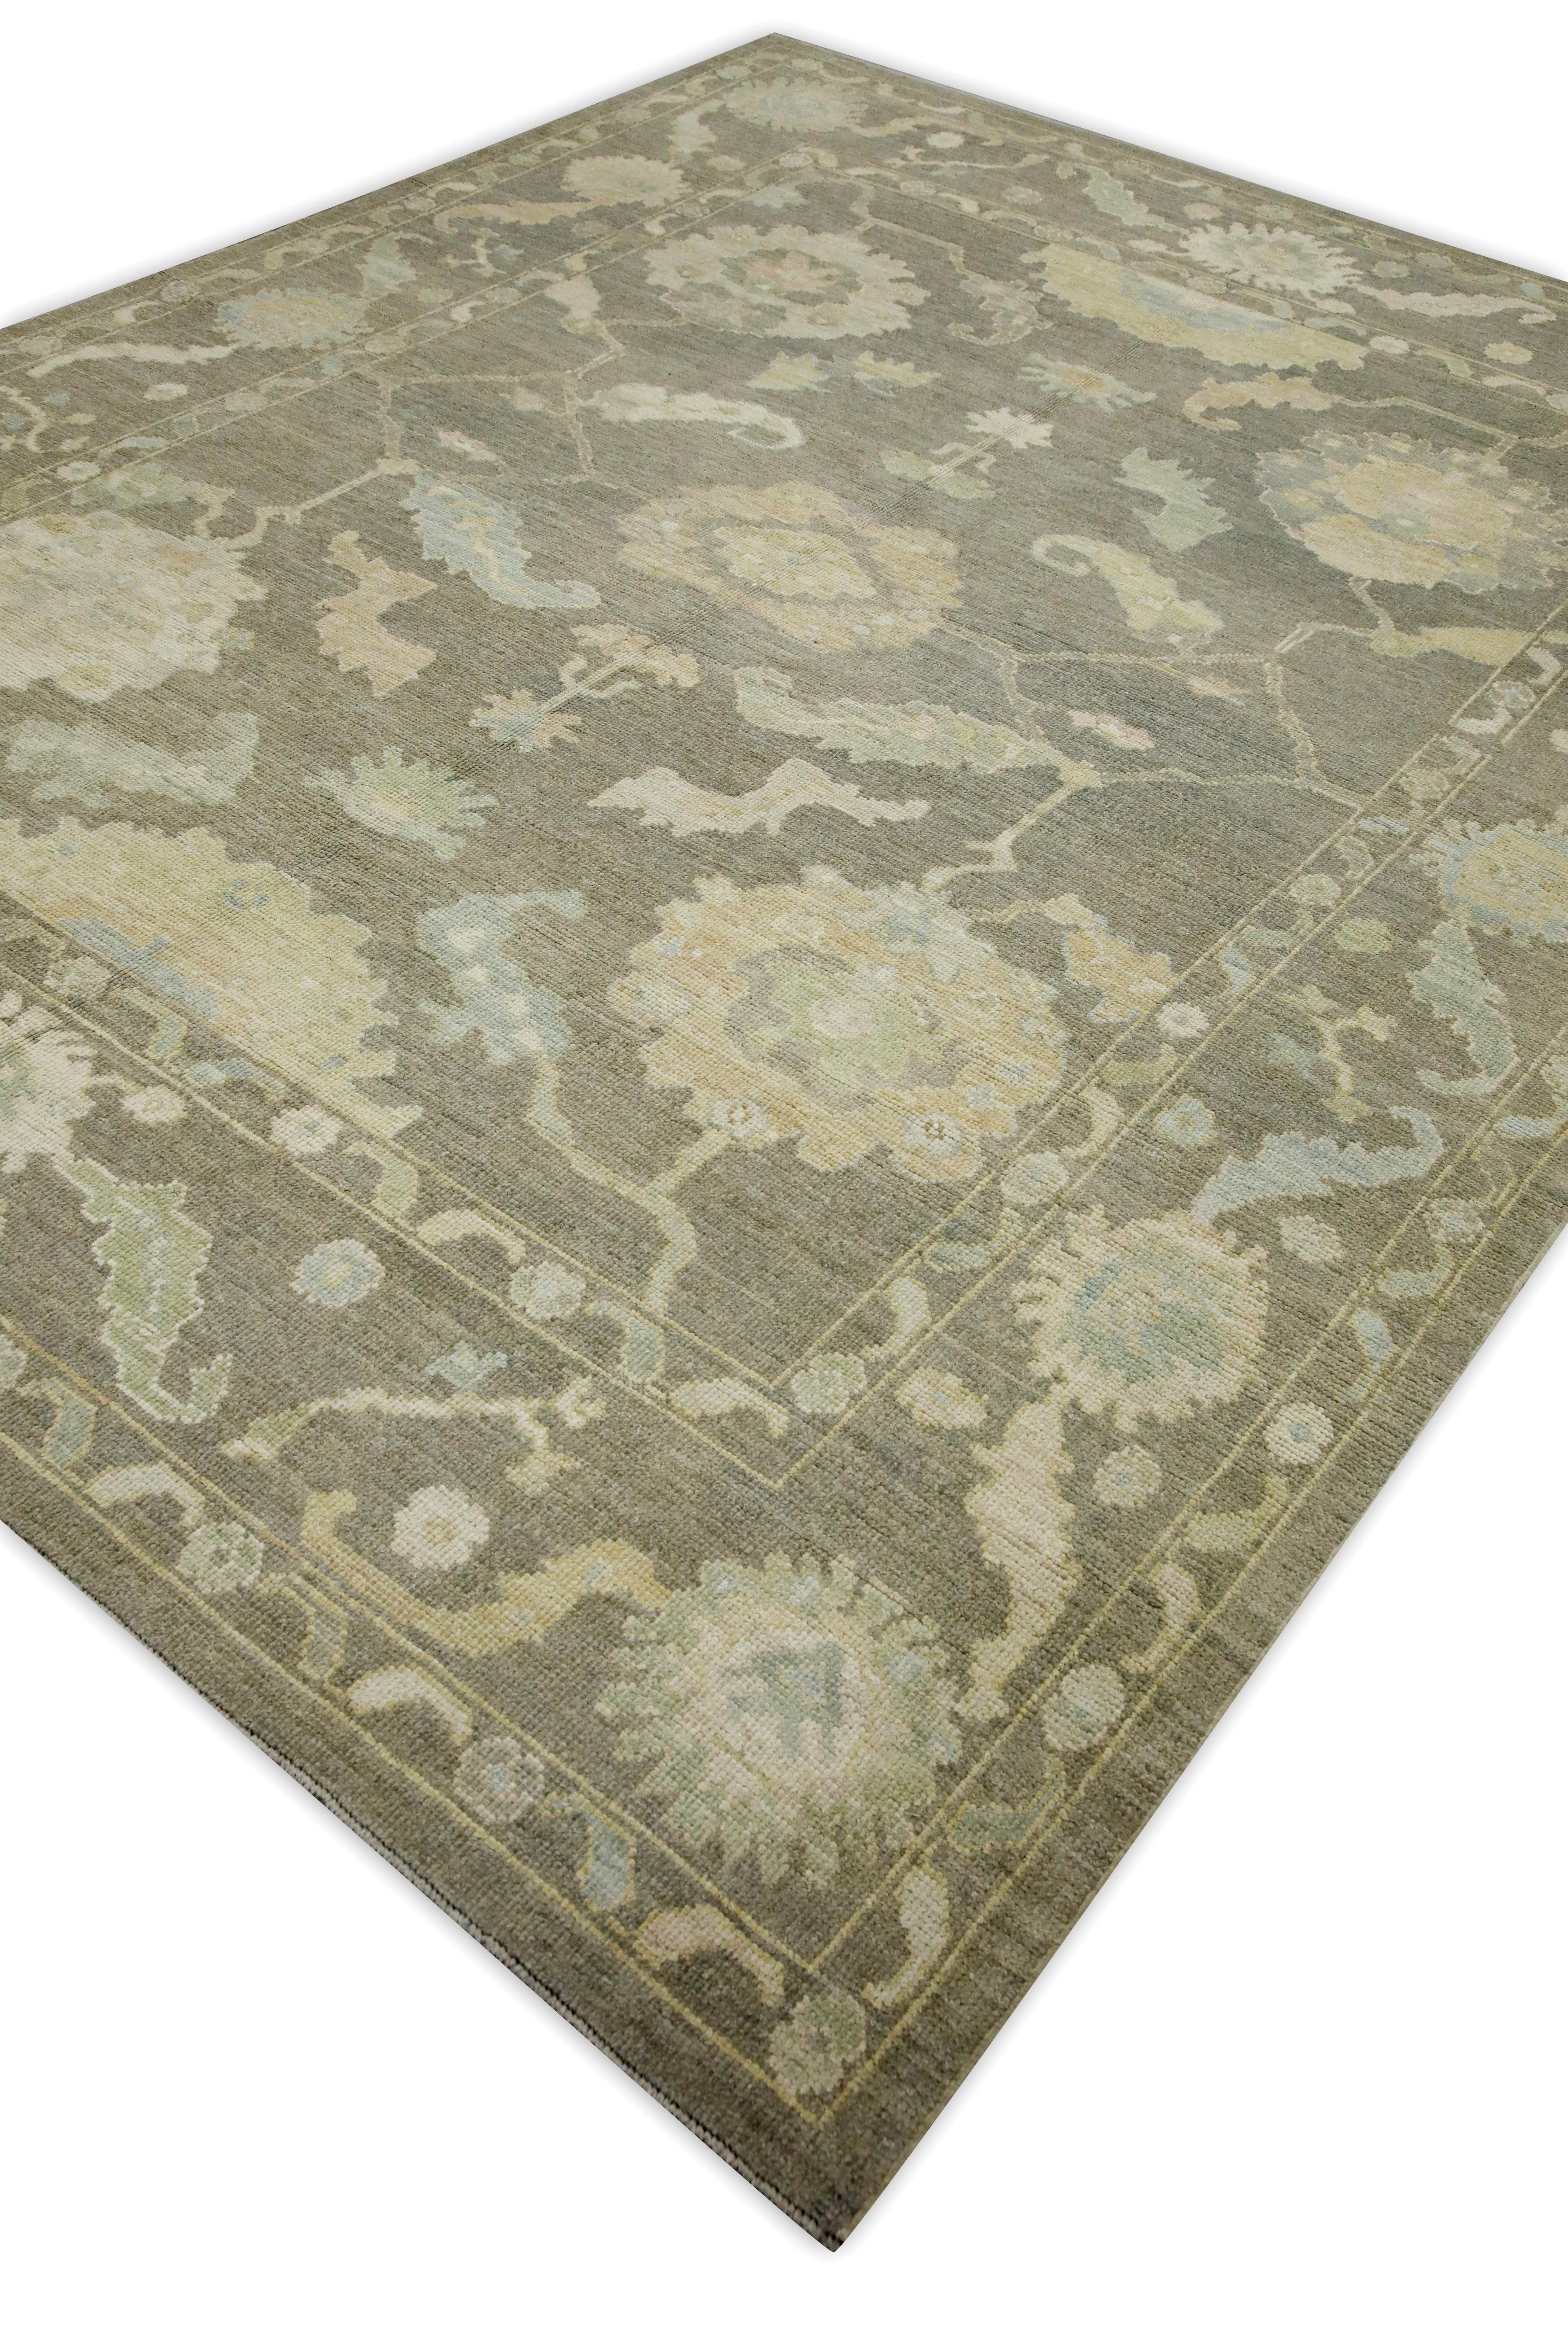 Contemporary Olive Green Floral Design Handwoven Wool Turkish Oushak Rug 8'2